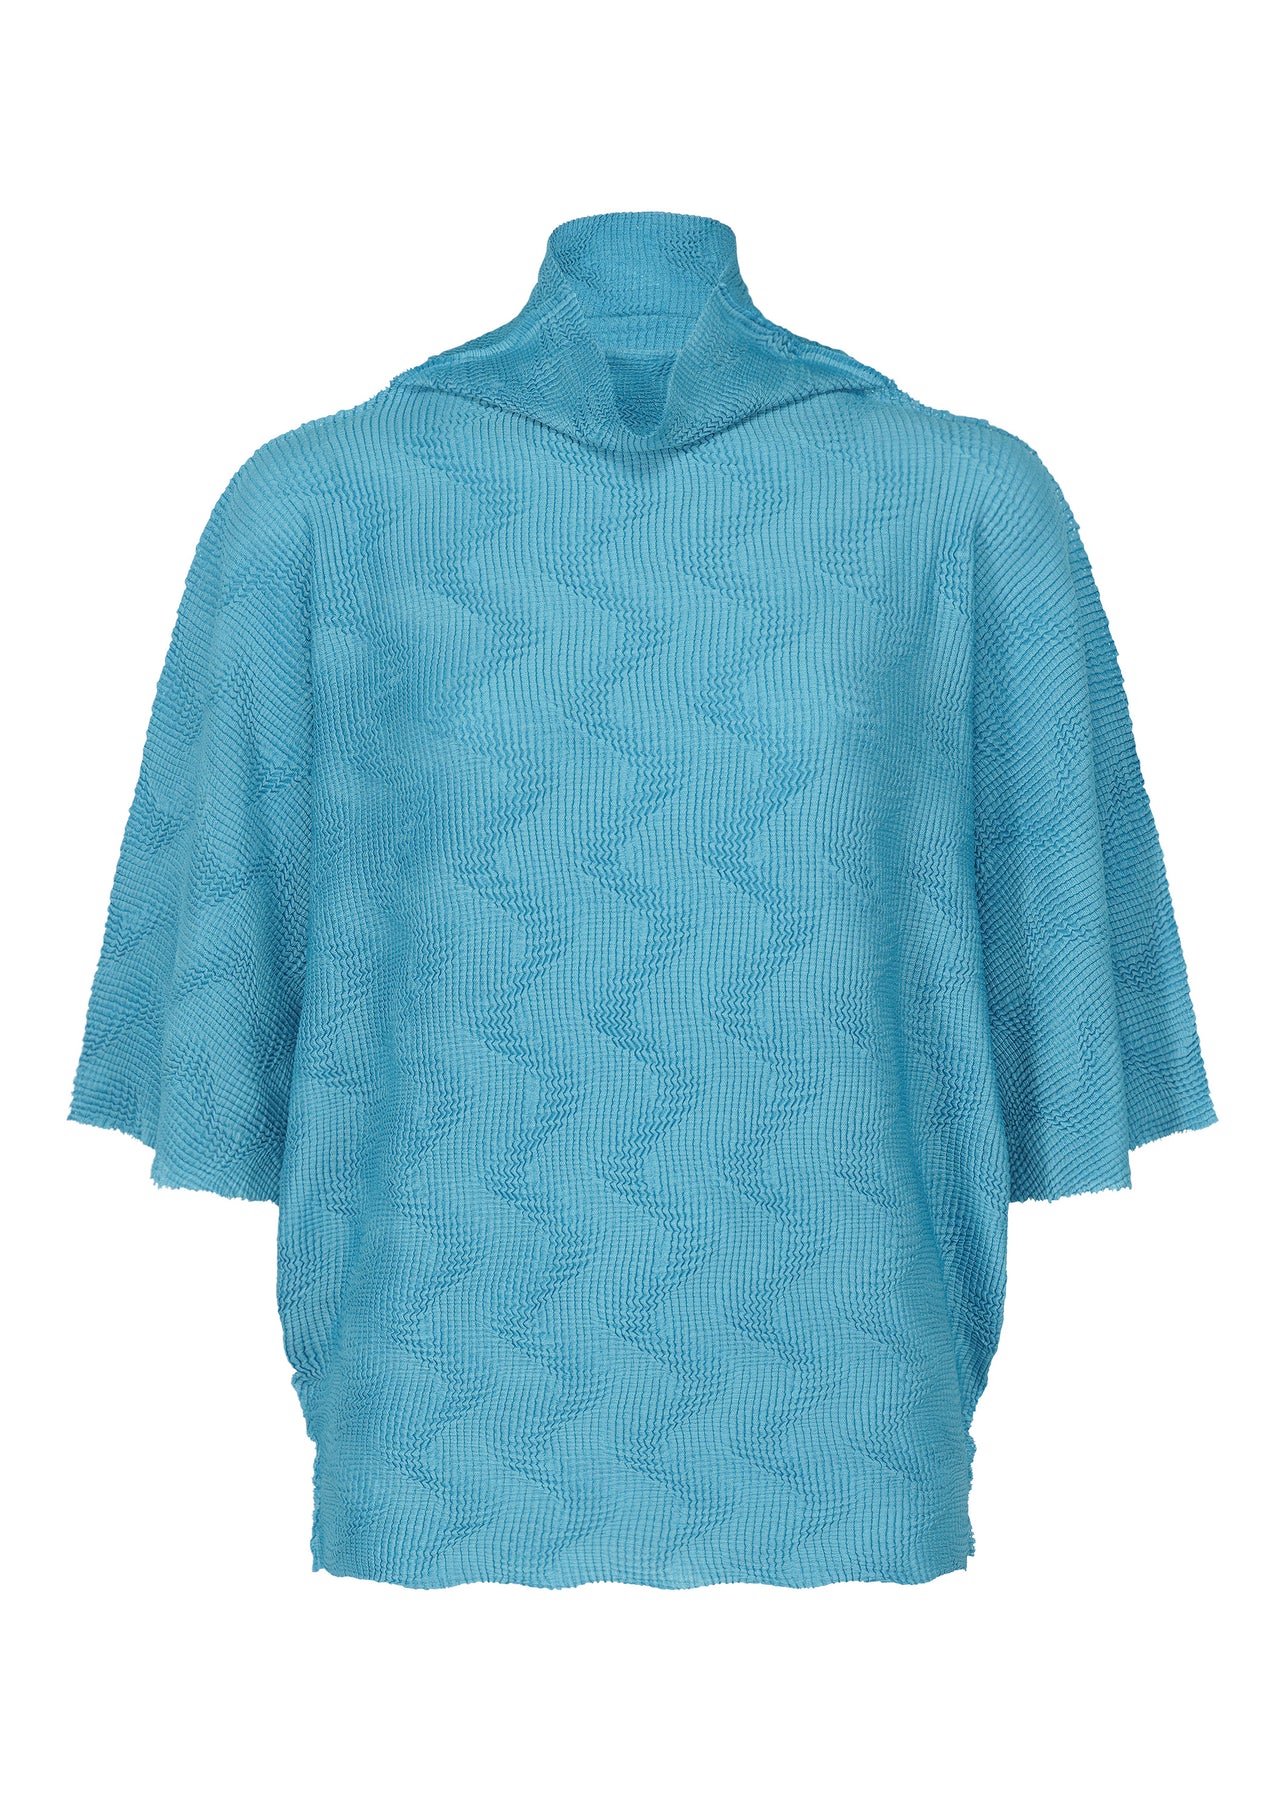 WAVE KNIT STRETCH PLEATS TOP | The official ISSEY MIYAKE ONLINE 